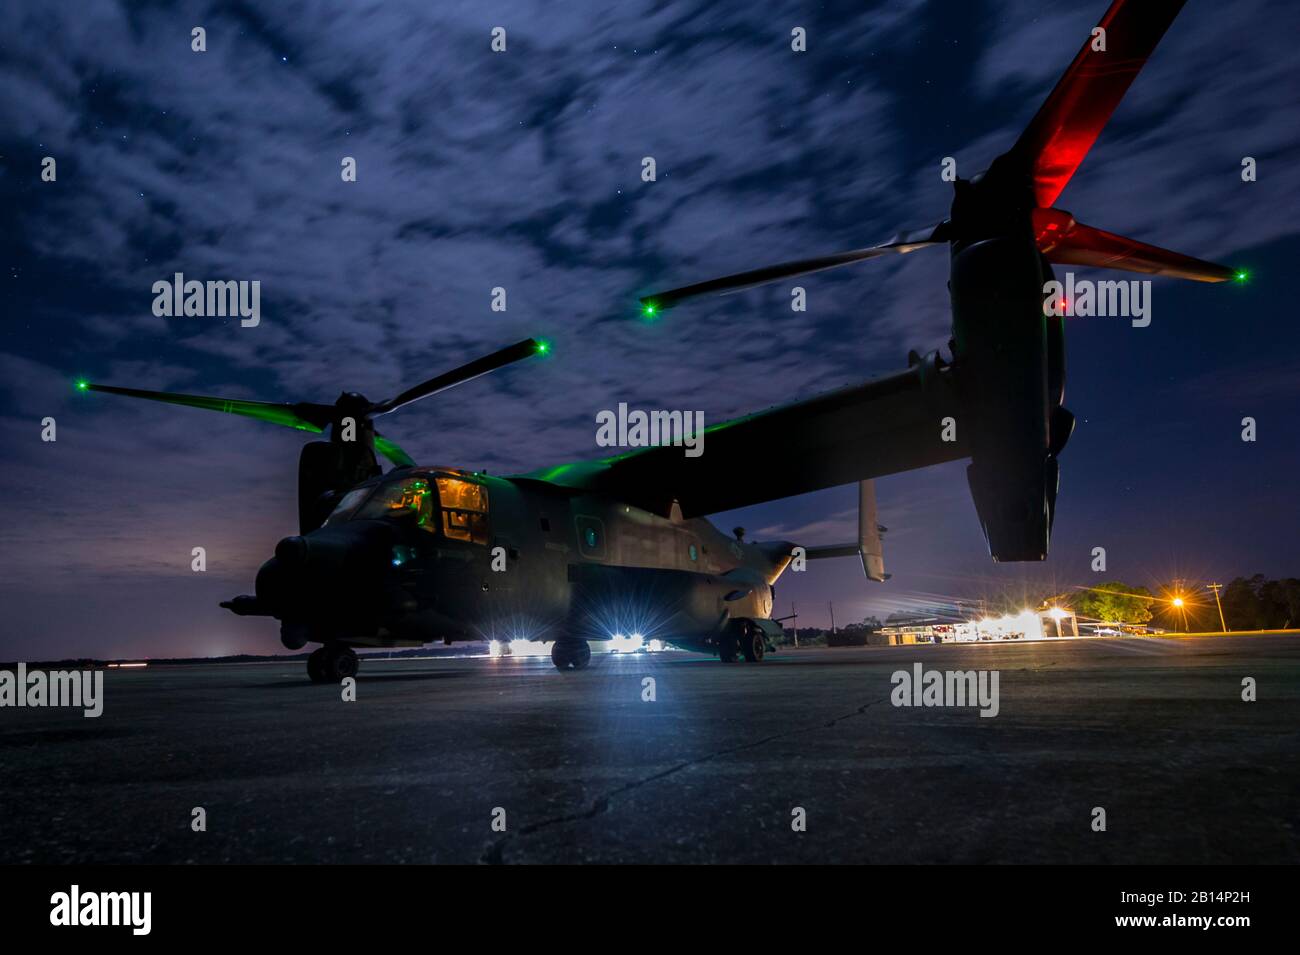 A U.S. Air Force CV-22 Osprey prepares to take-off during Emerald Warrior 17 at Avon Park, Fla., March 7, 2017. Emerald Warrior is a U.S. Special Operations Command exercise during which joint special operations forces train to respond to various threats across the spectrum of conflict. (U.S. Air Force photo by Airman 1st Class Keifer Bowes) Stock Photo